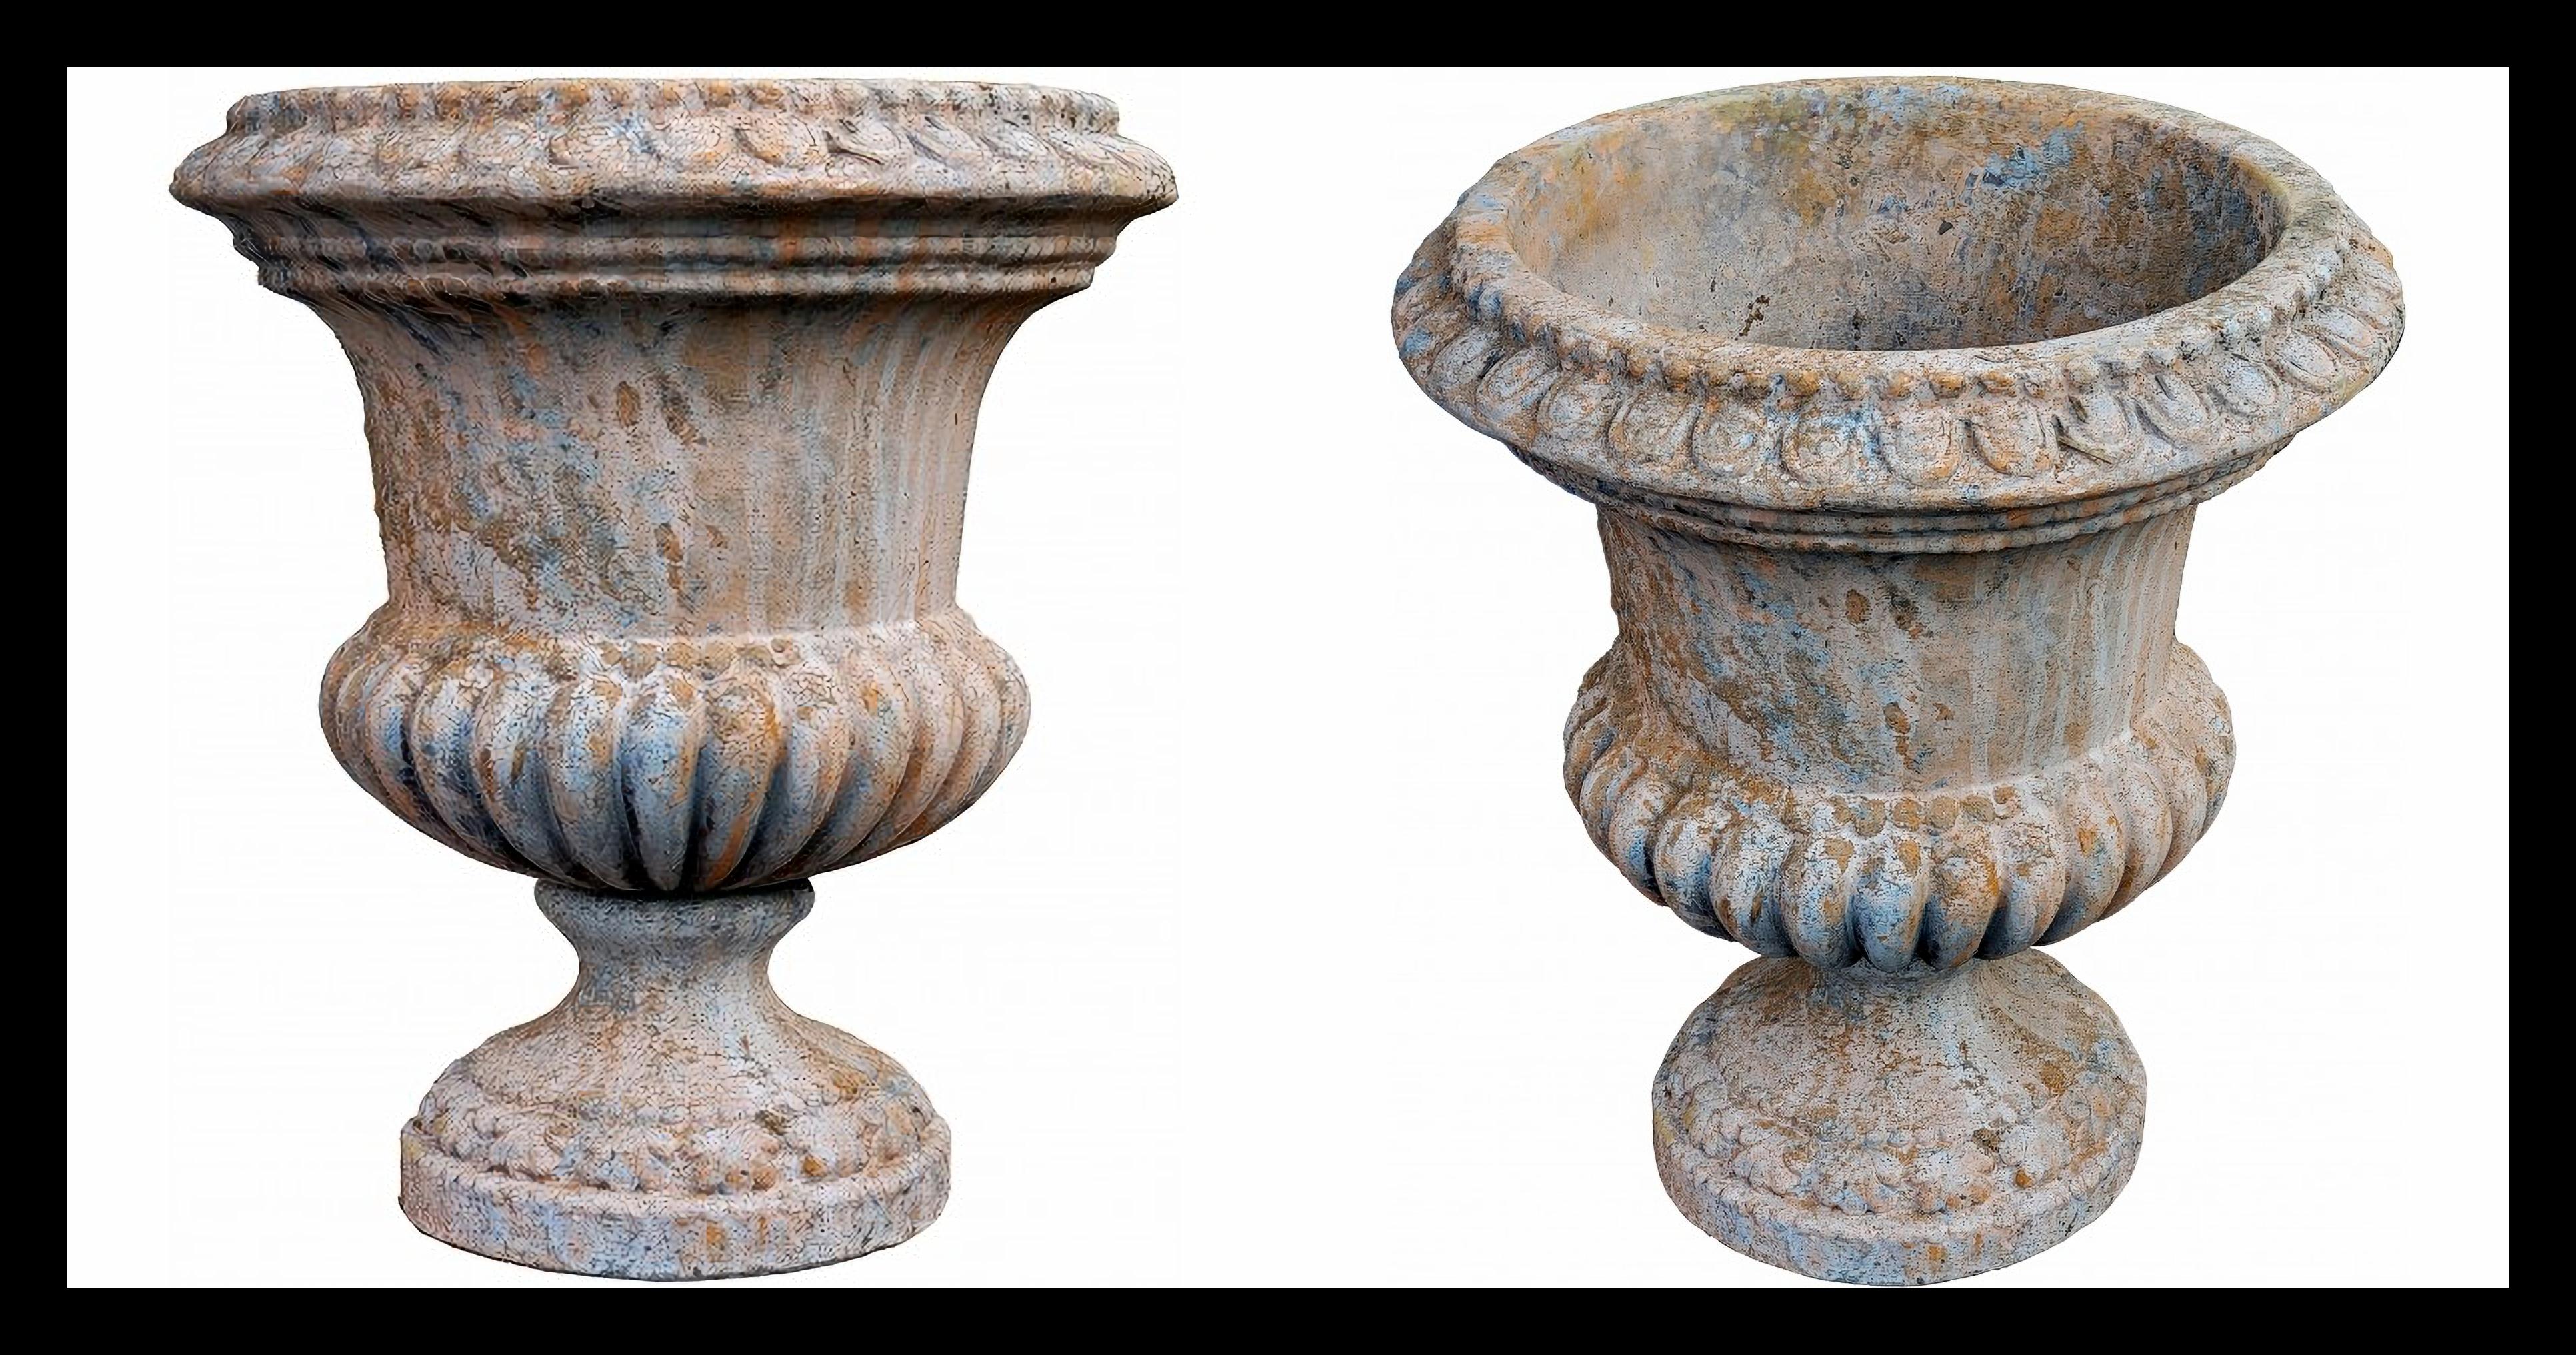 PAIR OF ANCIENT 20th CENTURY SIENA TERRACOTTA VASE

Sienese ORNAMENTAL VASE for GATE and FENCE.
Medici chalice decorated with crowns of leaves and three crowns of mamille 24 vertical pods.

HEIGHT 42 cm
INTERNAL DEPTH OF THE BASIN 26 cm
WEIGHT 12